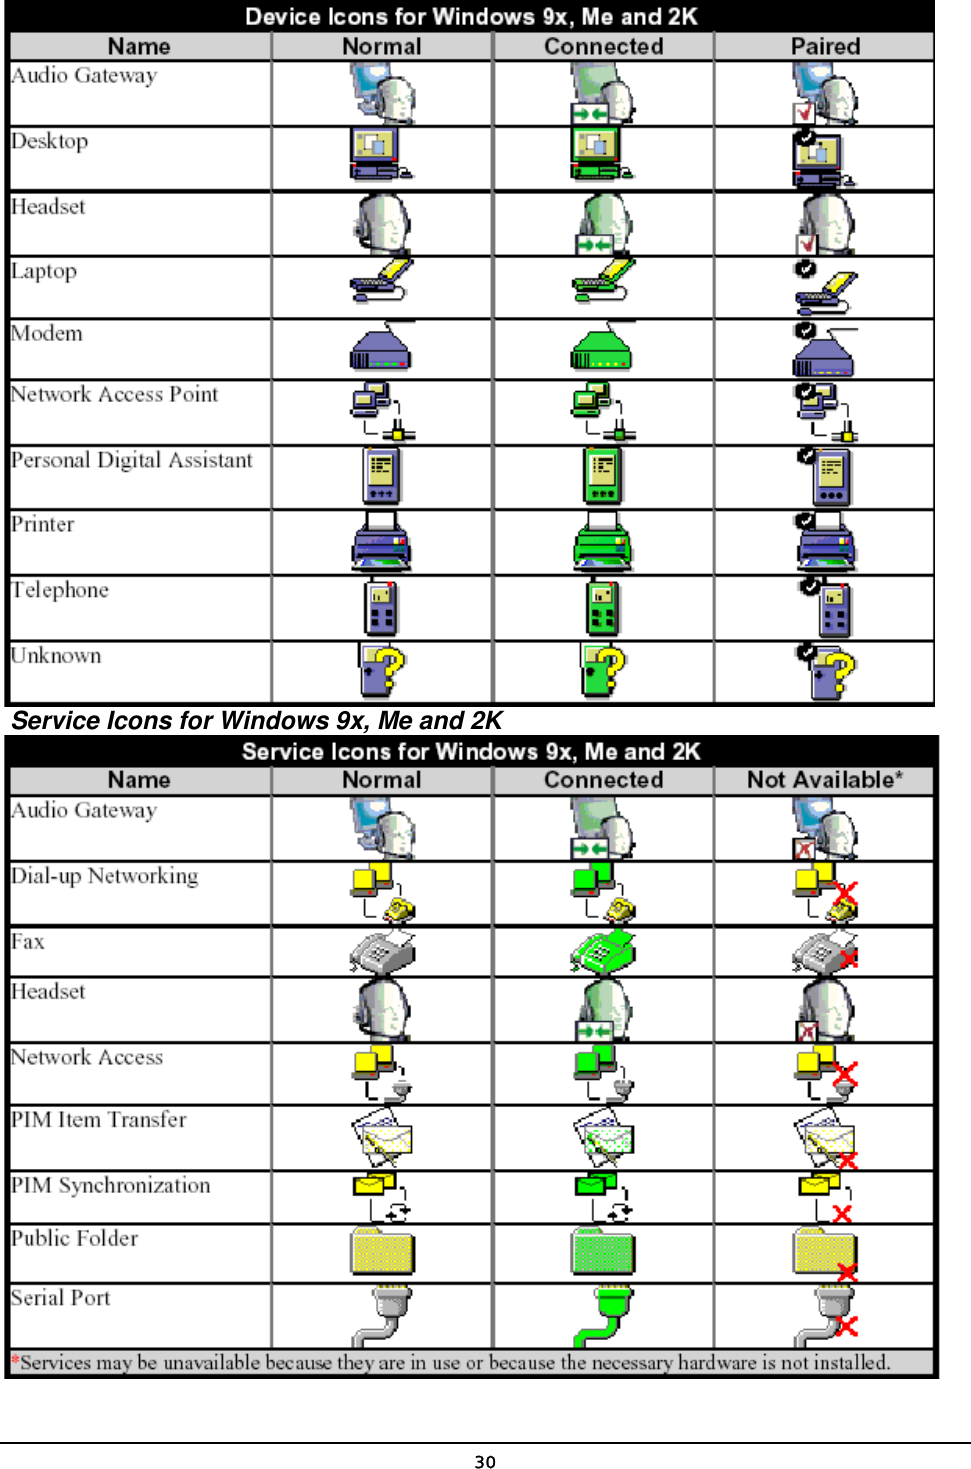   30  Service Icons for Windows 9x, Me and 2K  